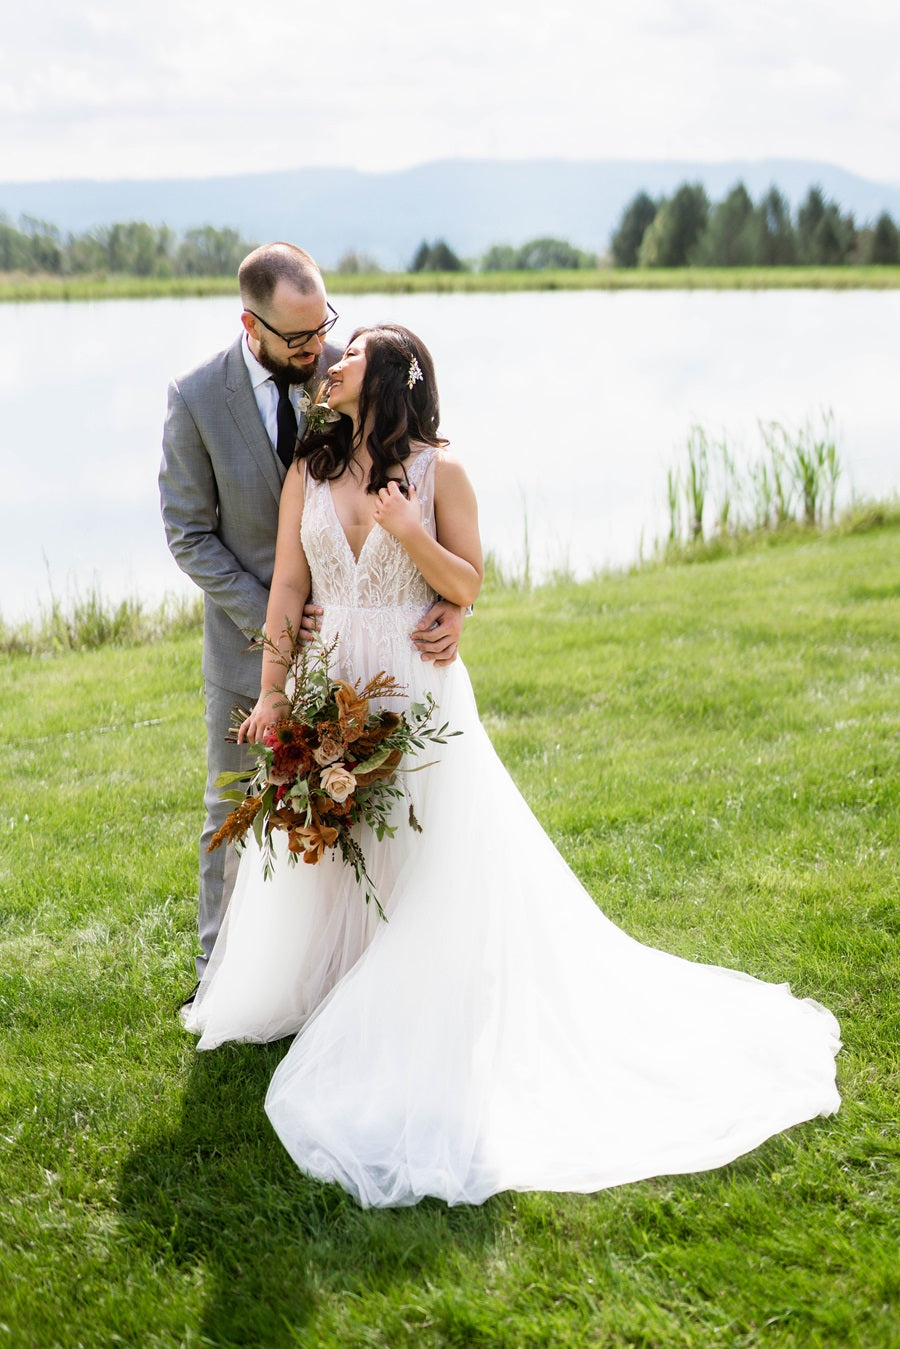 Bride and groom embrace in front of a lake at the Wrens Roost Barn. Bride holds a bouquet made in fall colors.